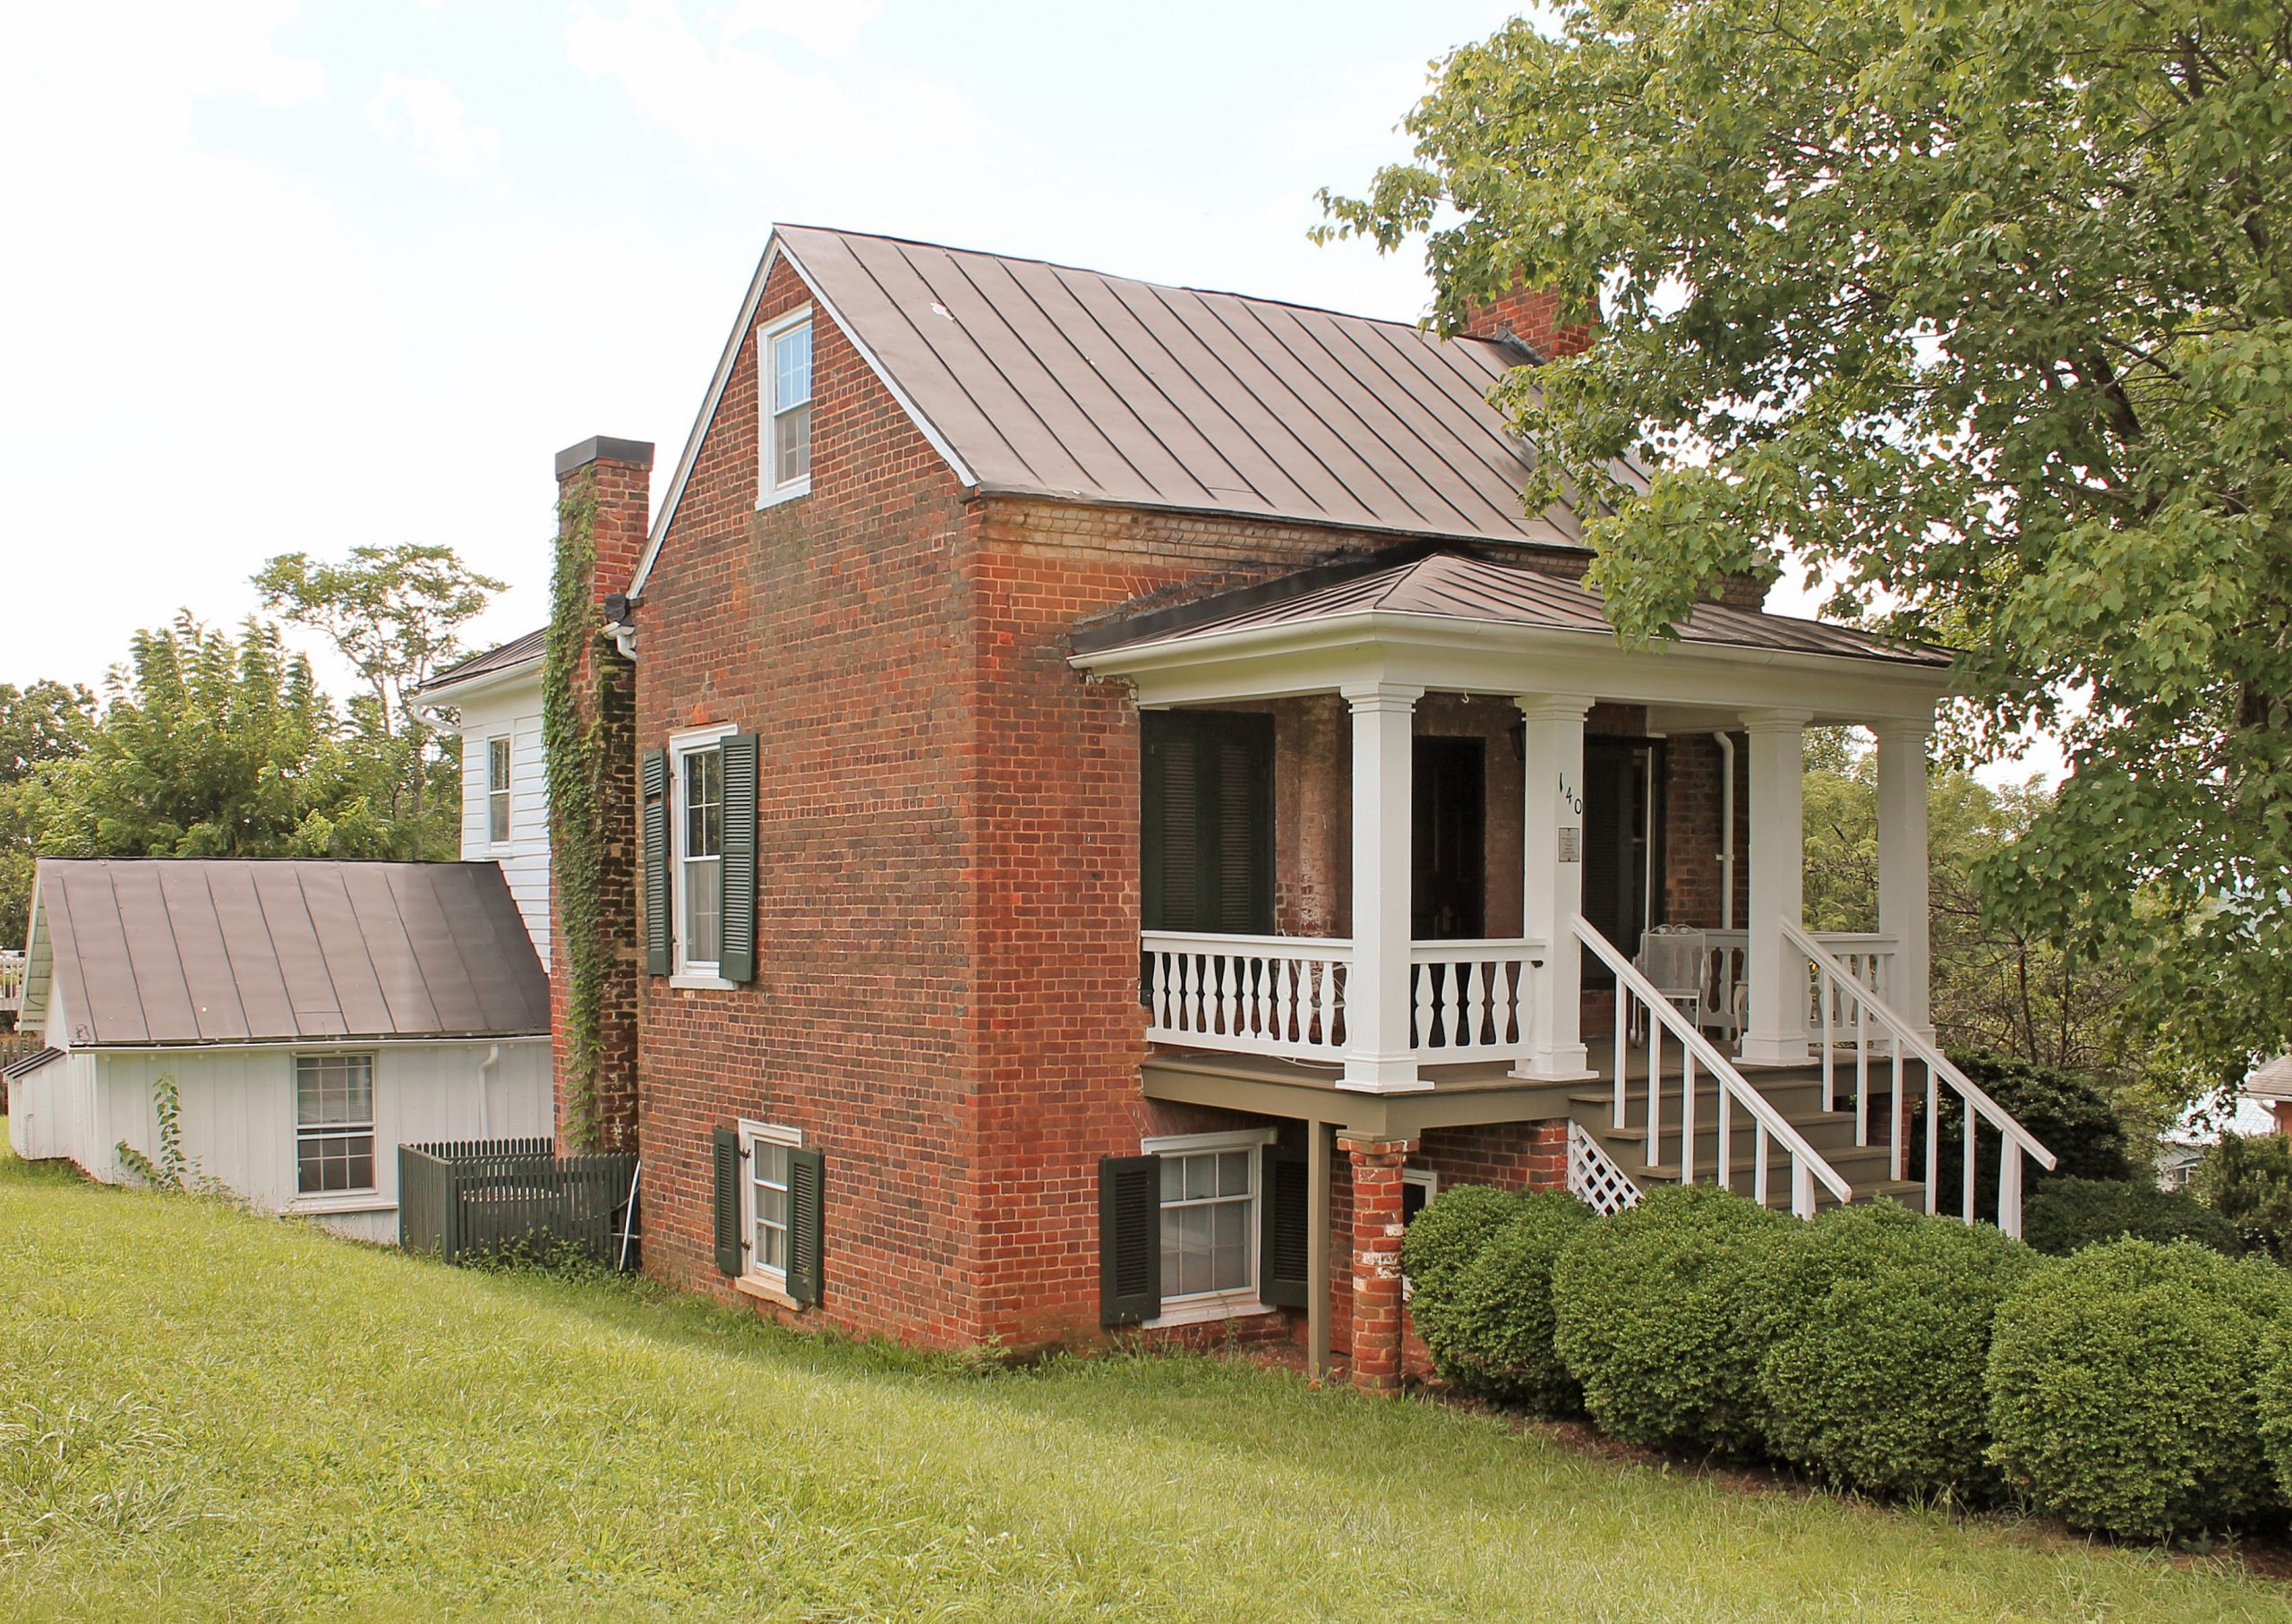 Woods-Meade Historic Home